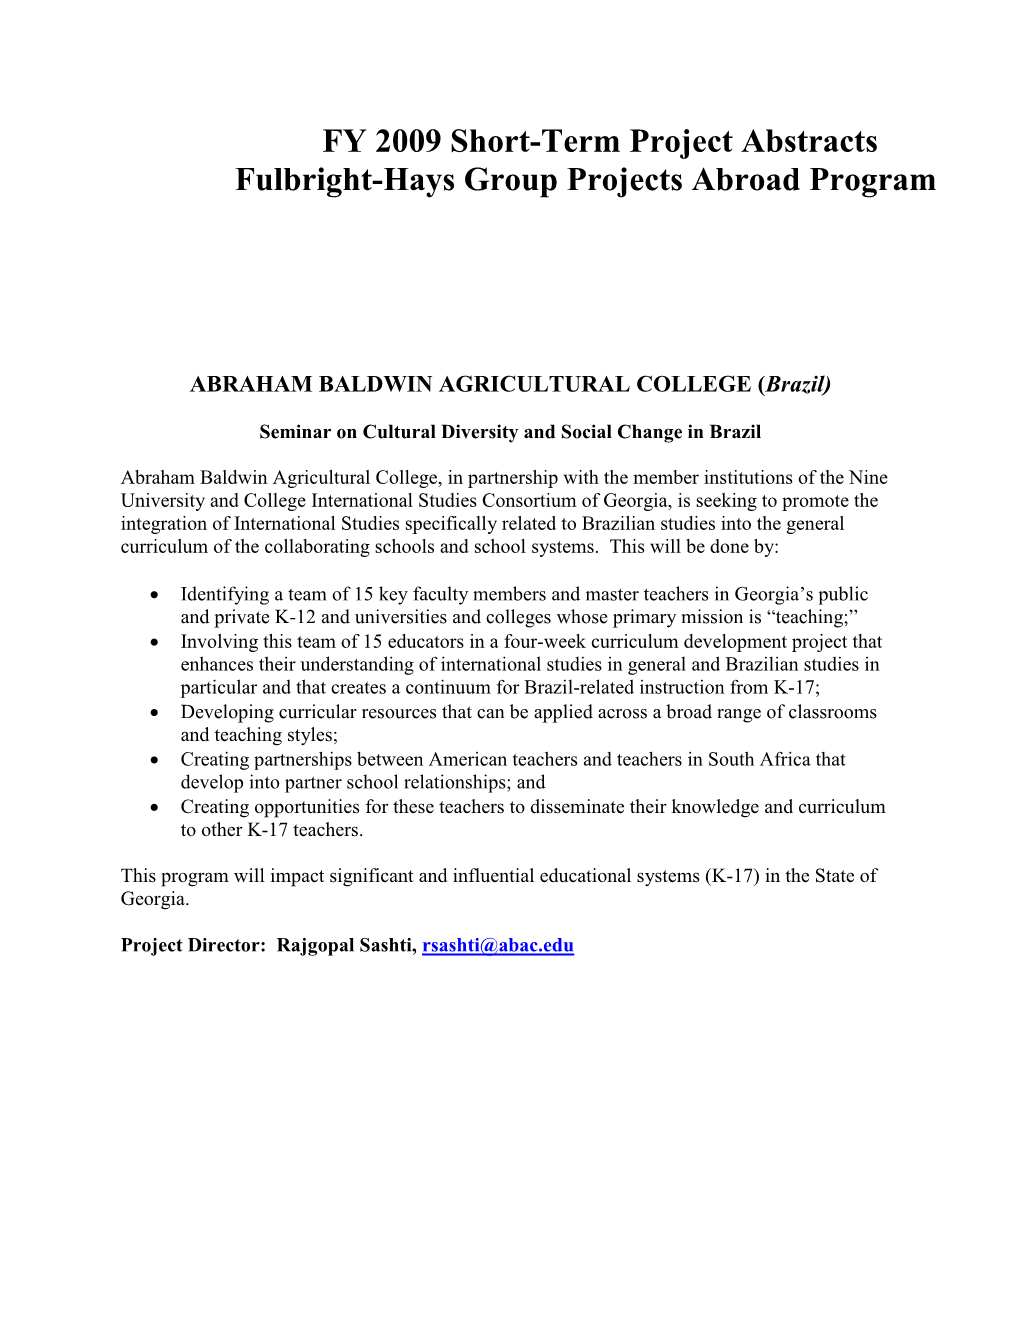 FY 2009 Short-Term Project Abstracts Fulbright-Hays Group Projects Abroad Program